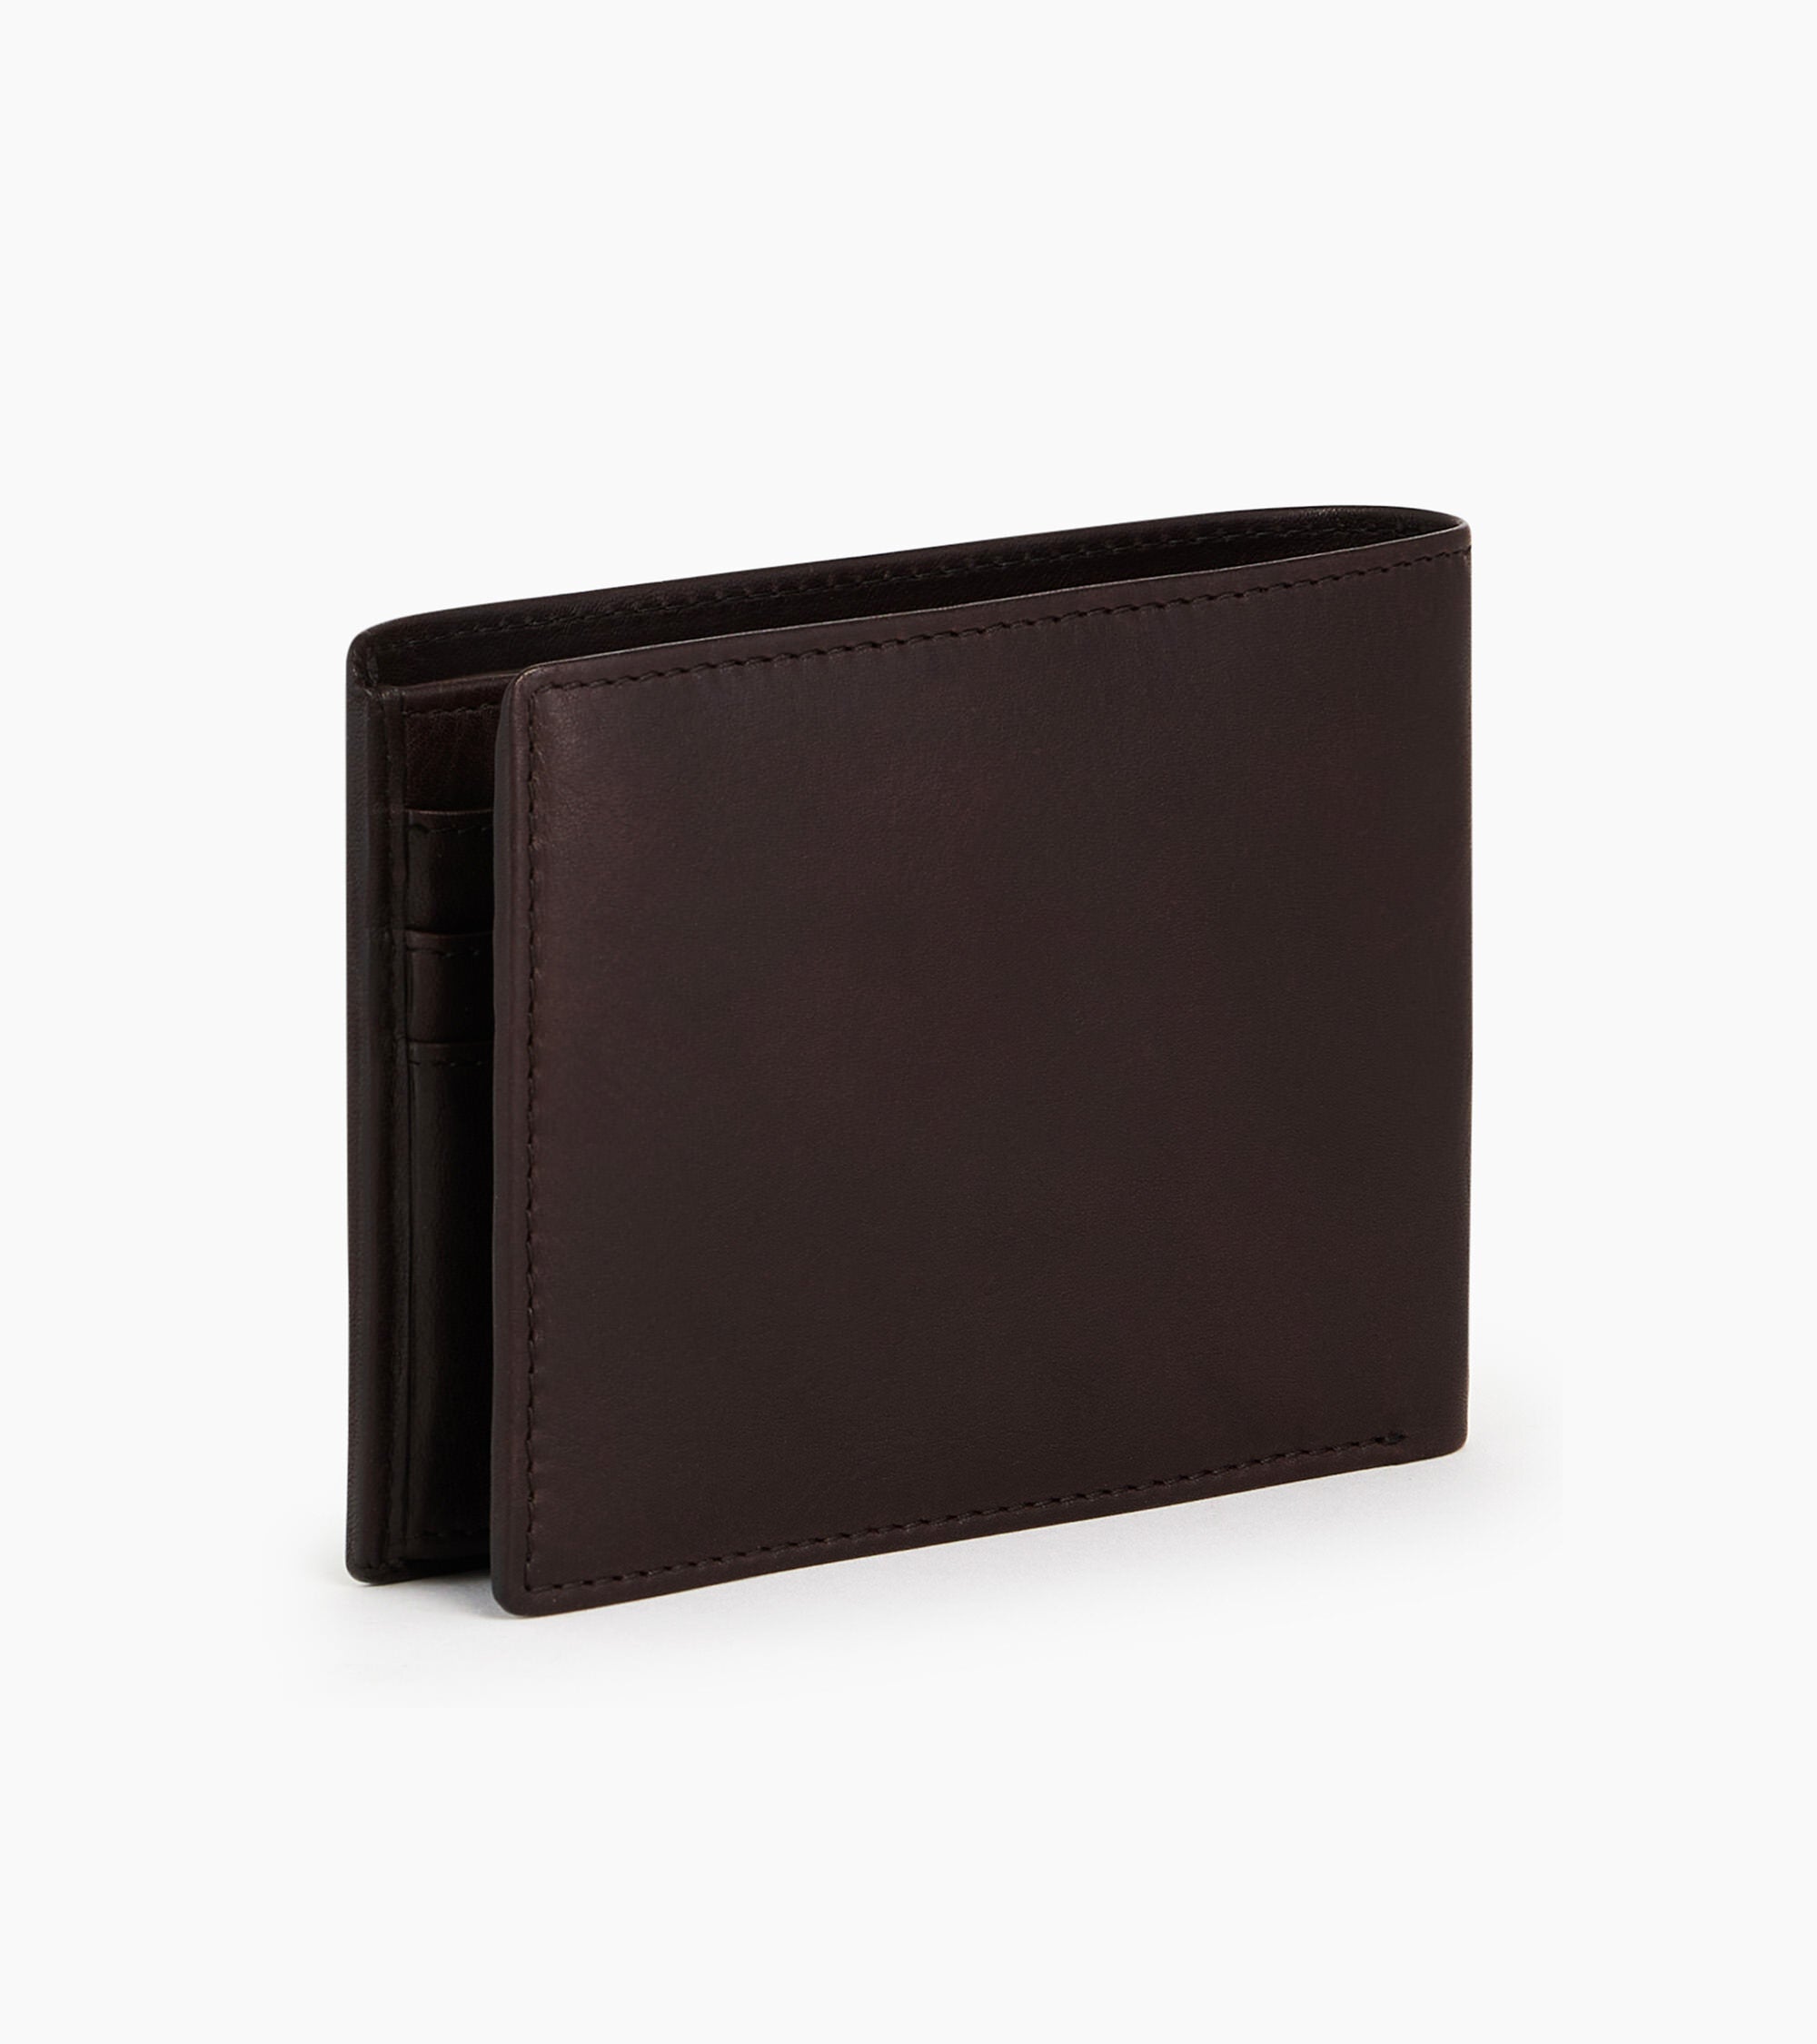 Gary medium horizontal wallet model 2 flaps in oiled leather